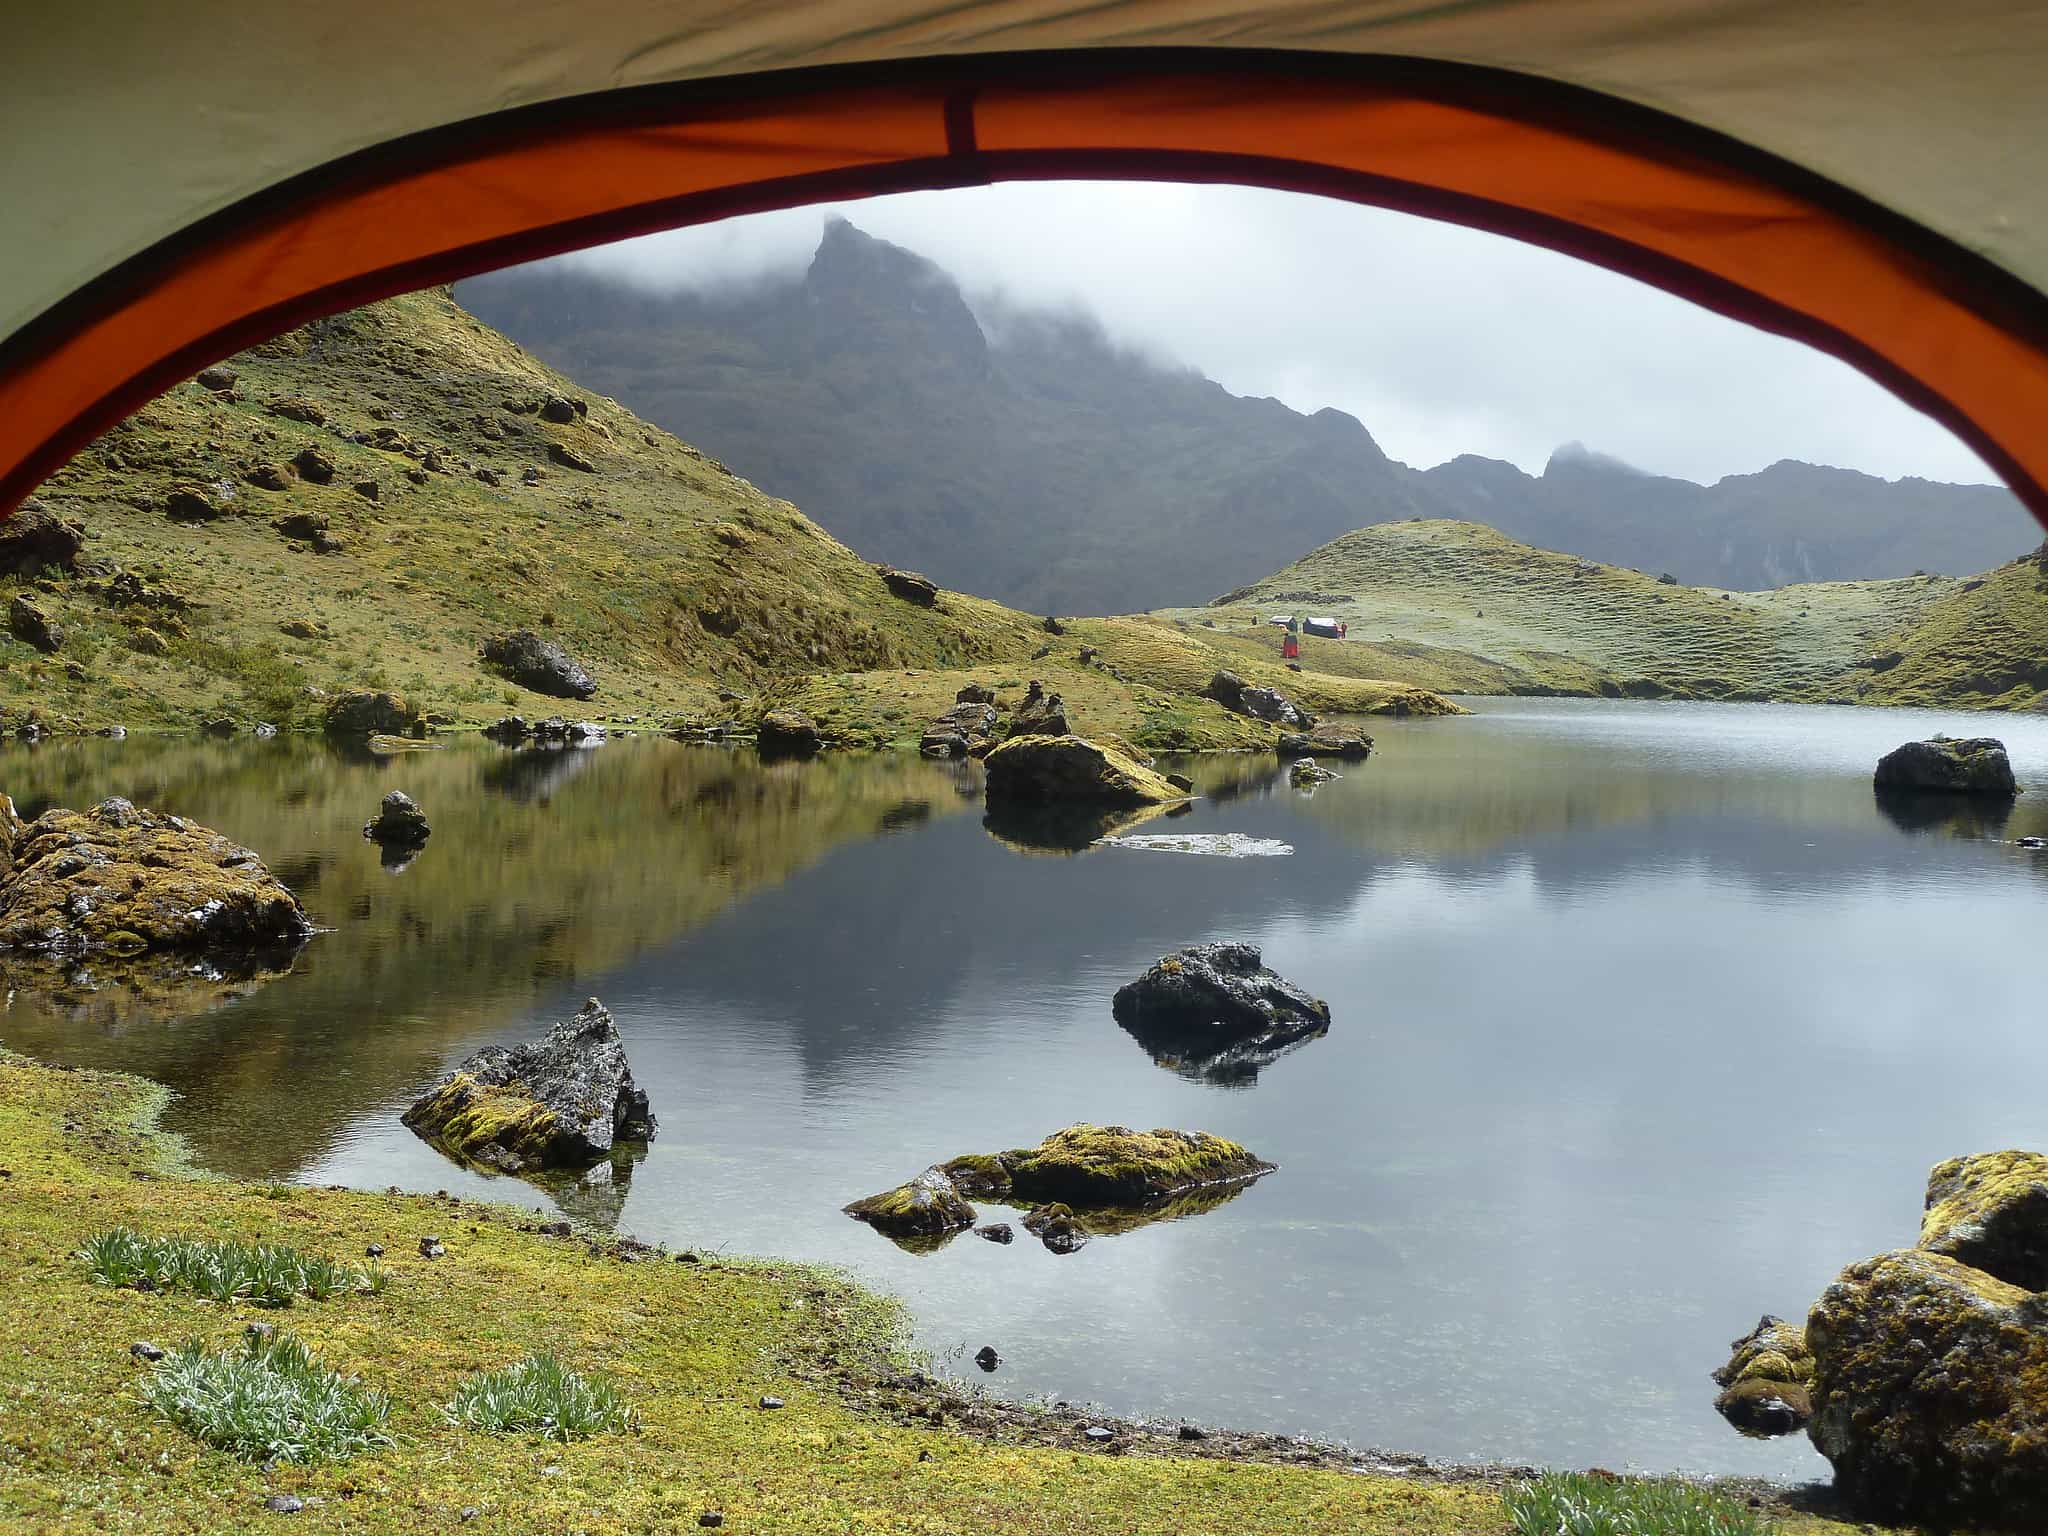 View of a lake from the inside of a tent